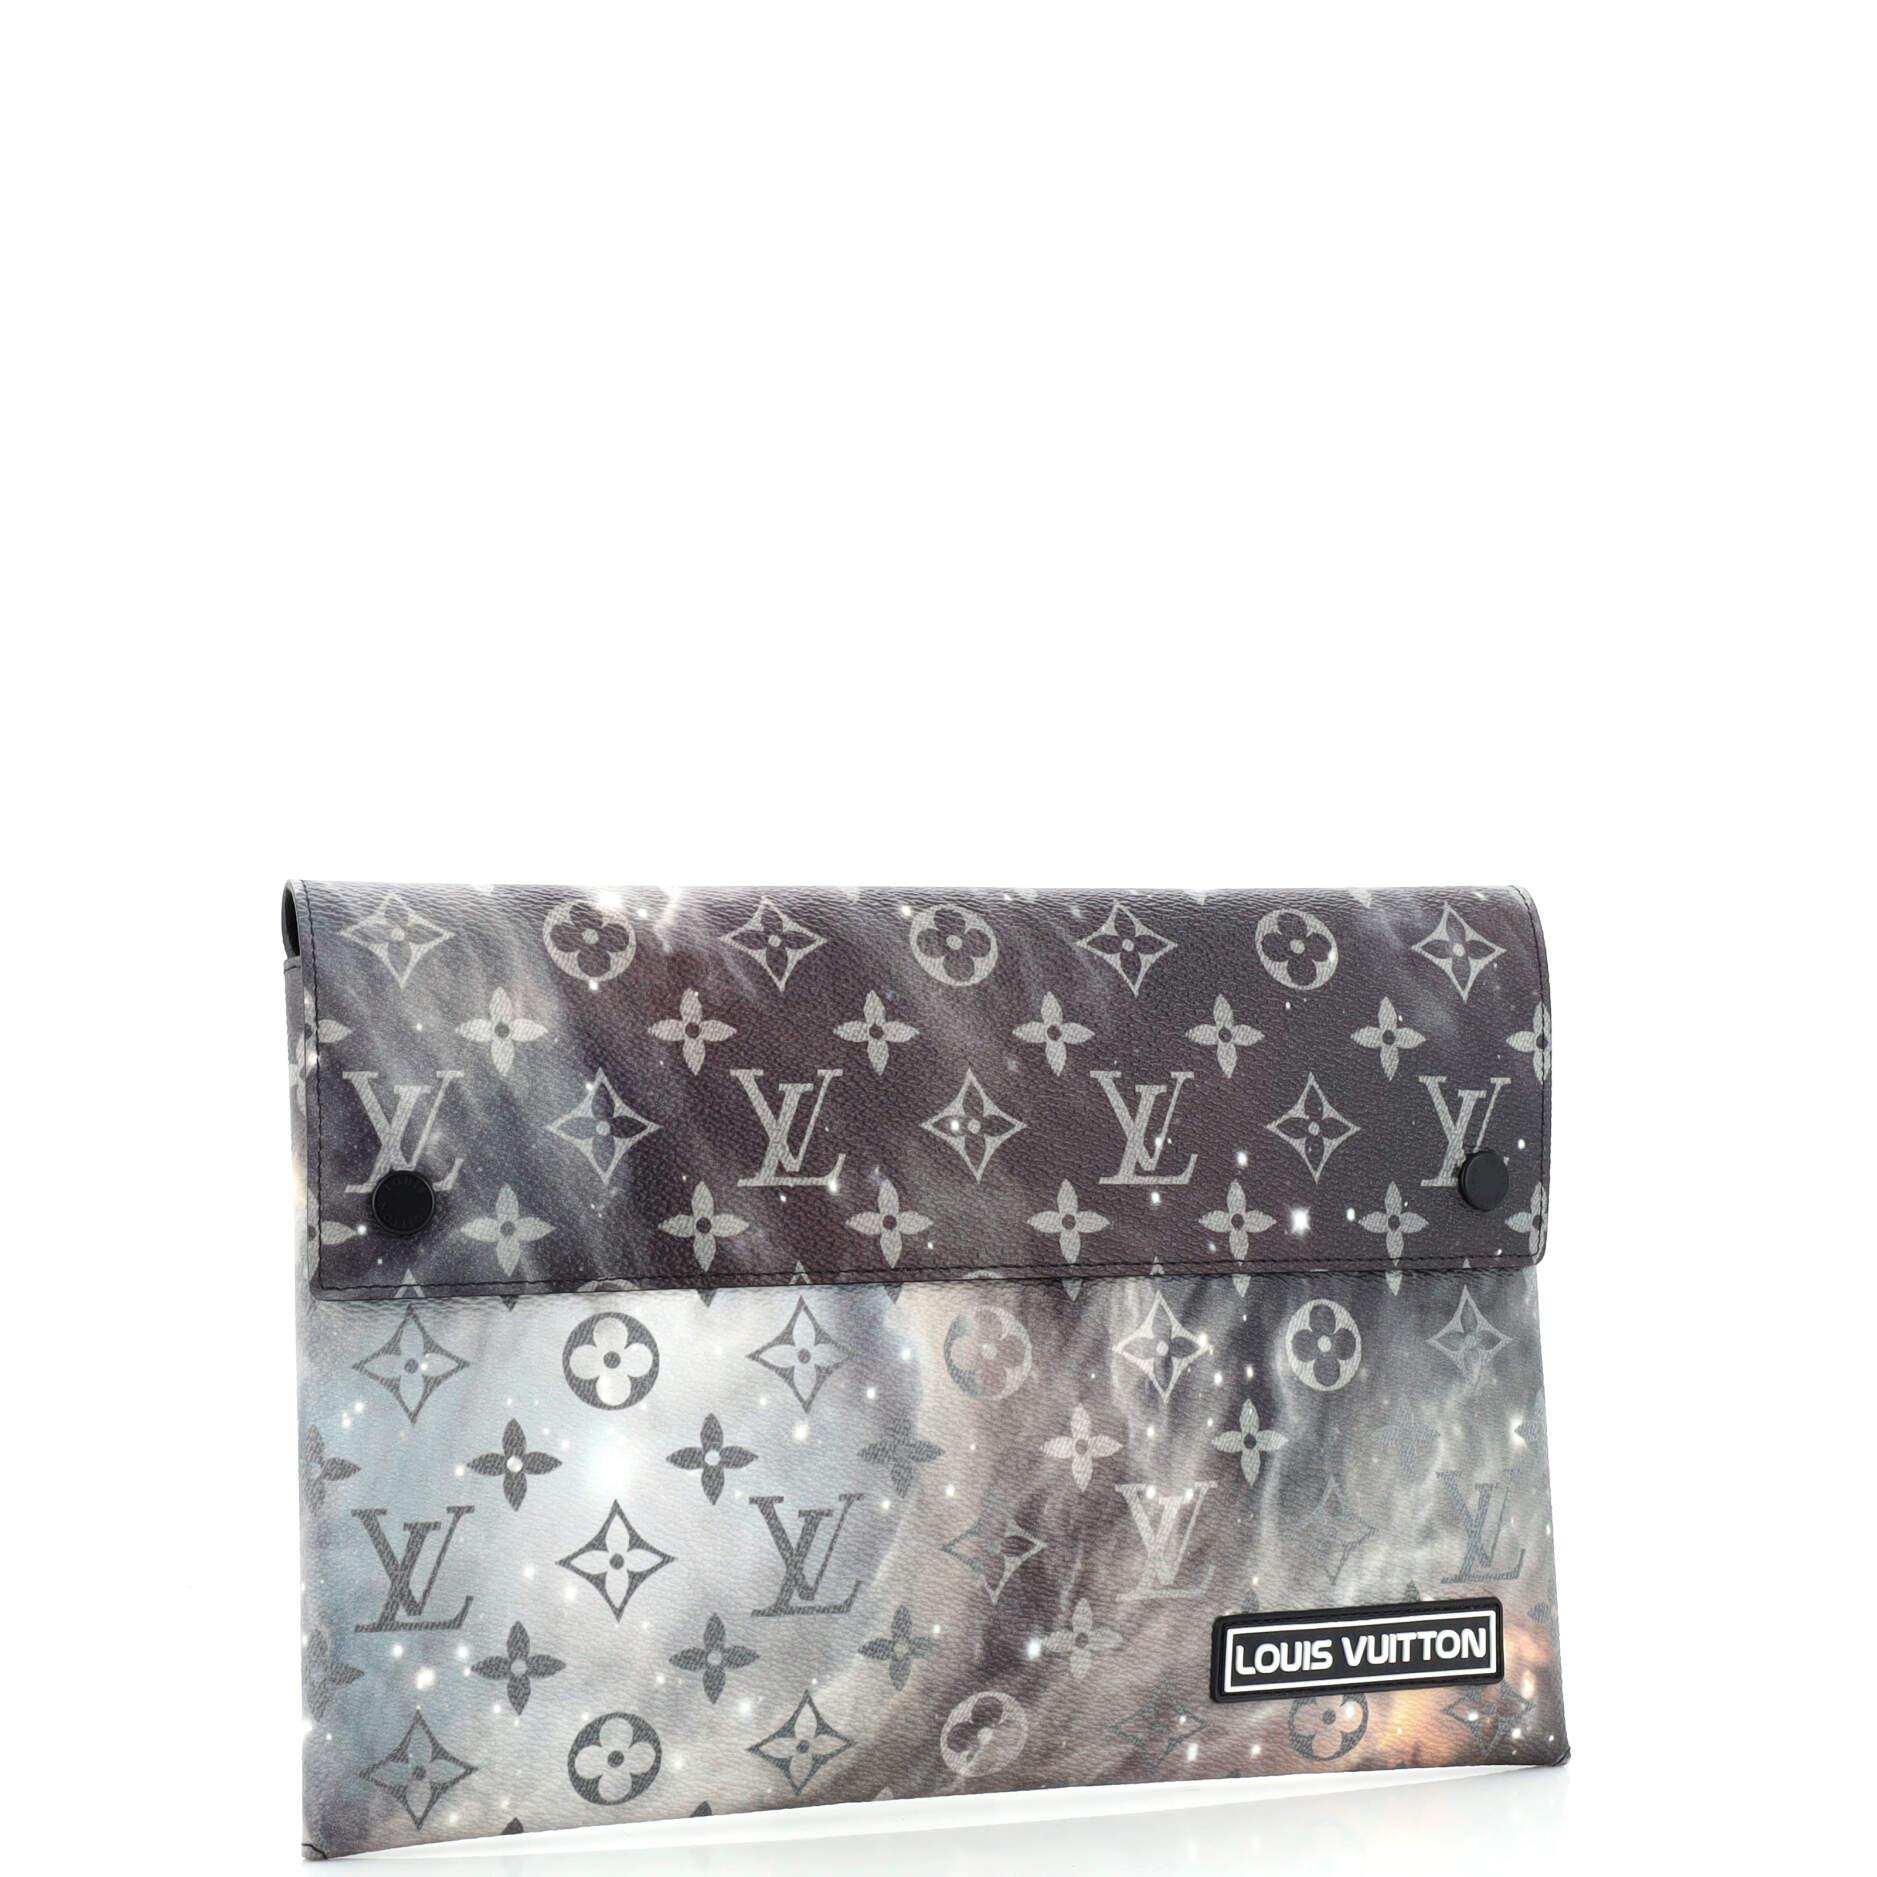 louis vuitton galaxy On Sale - Authenticated Resale